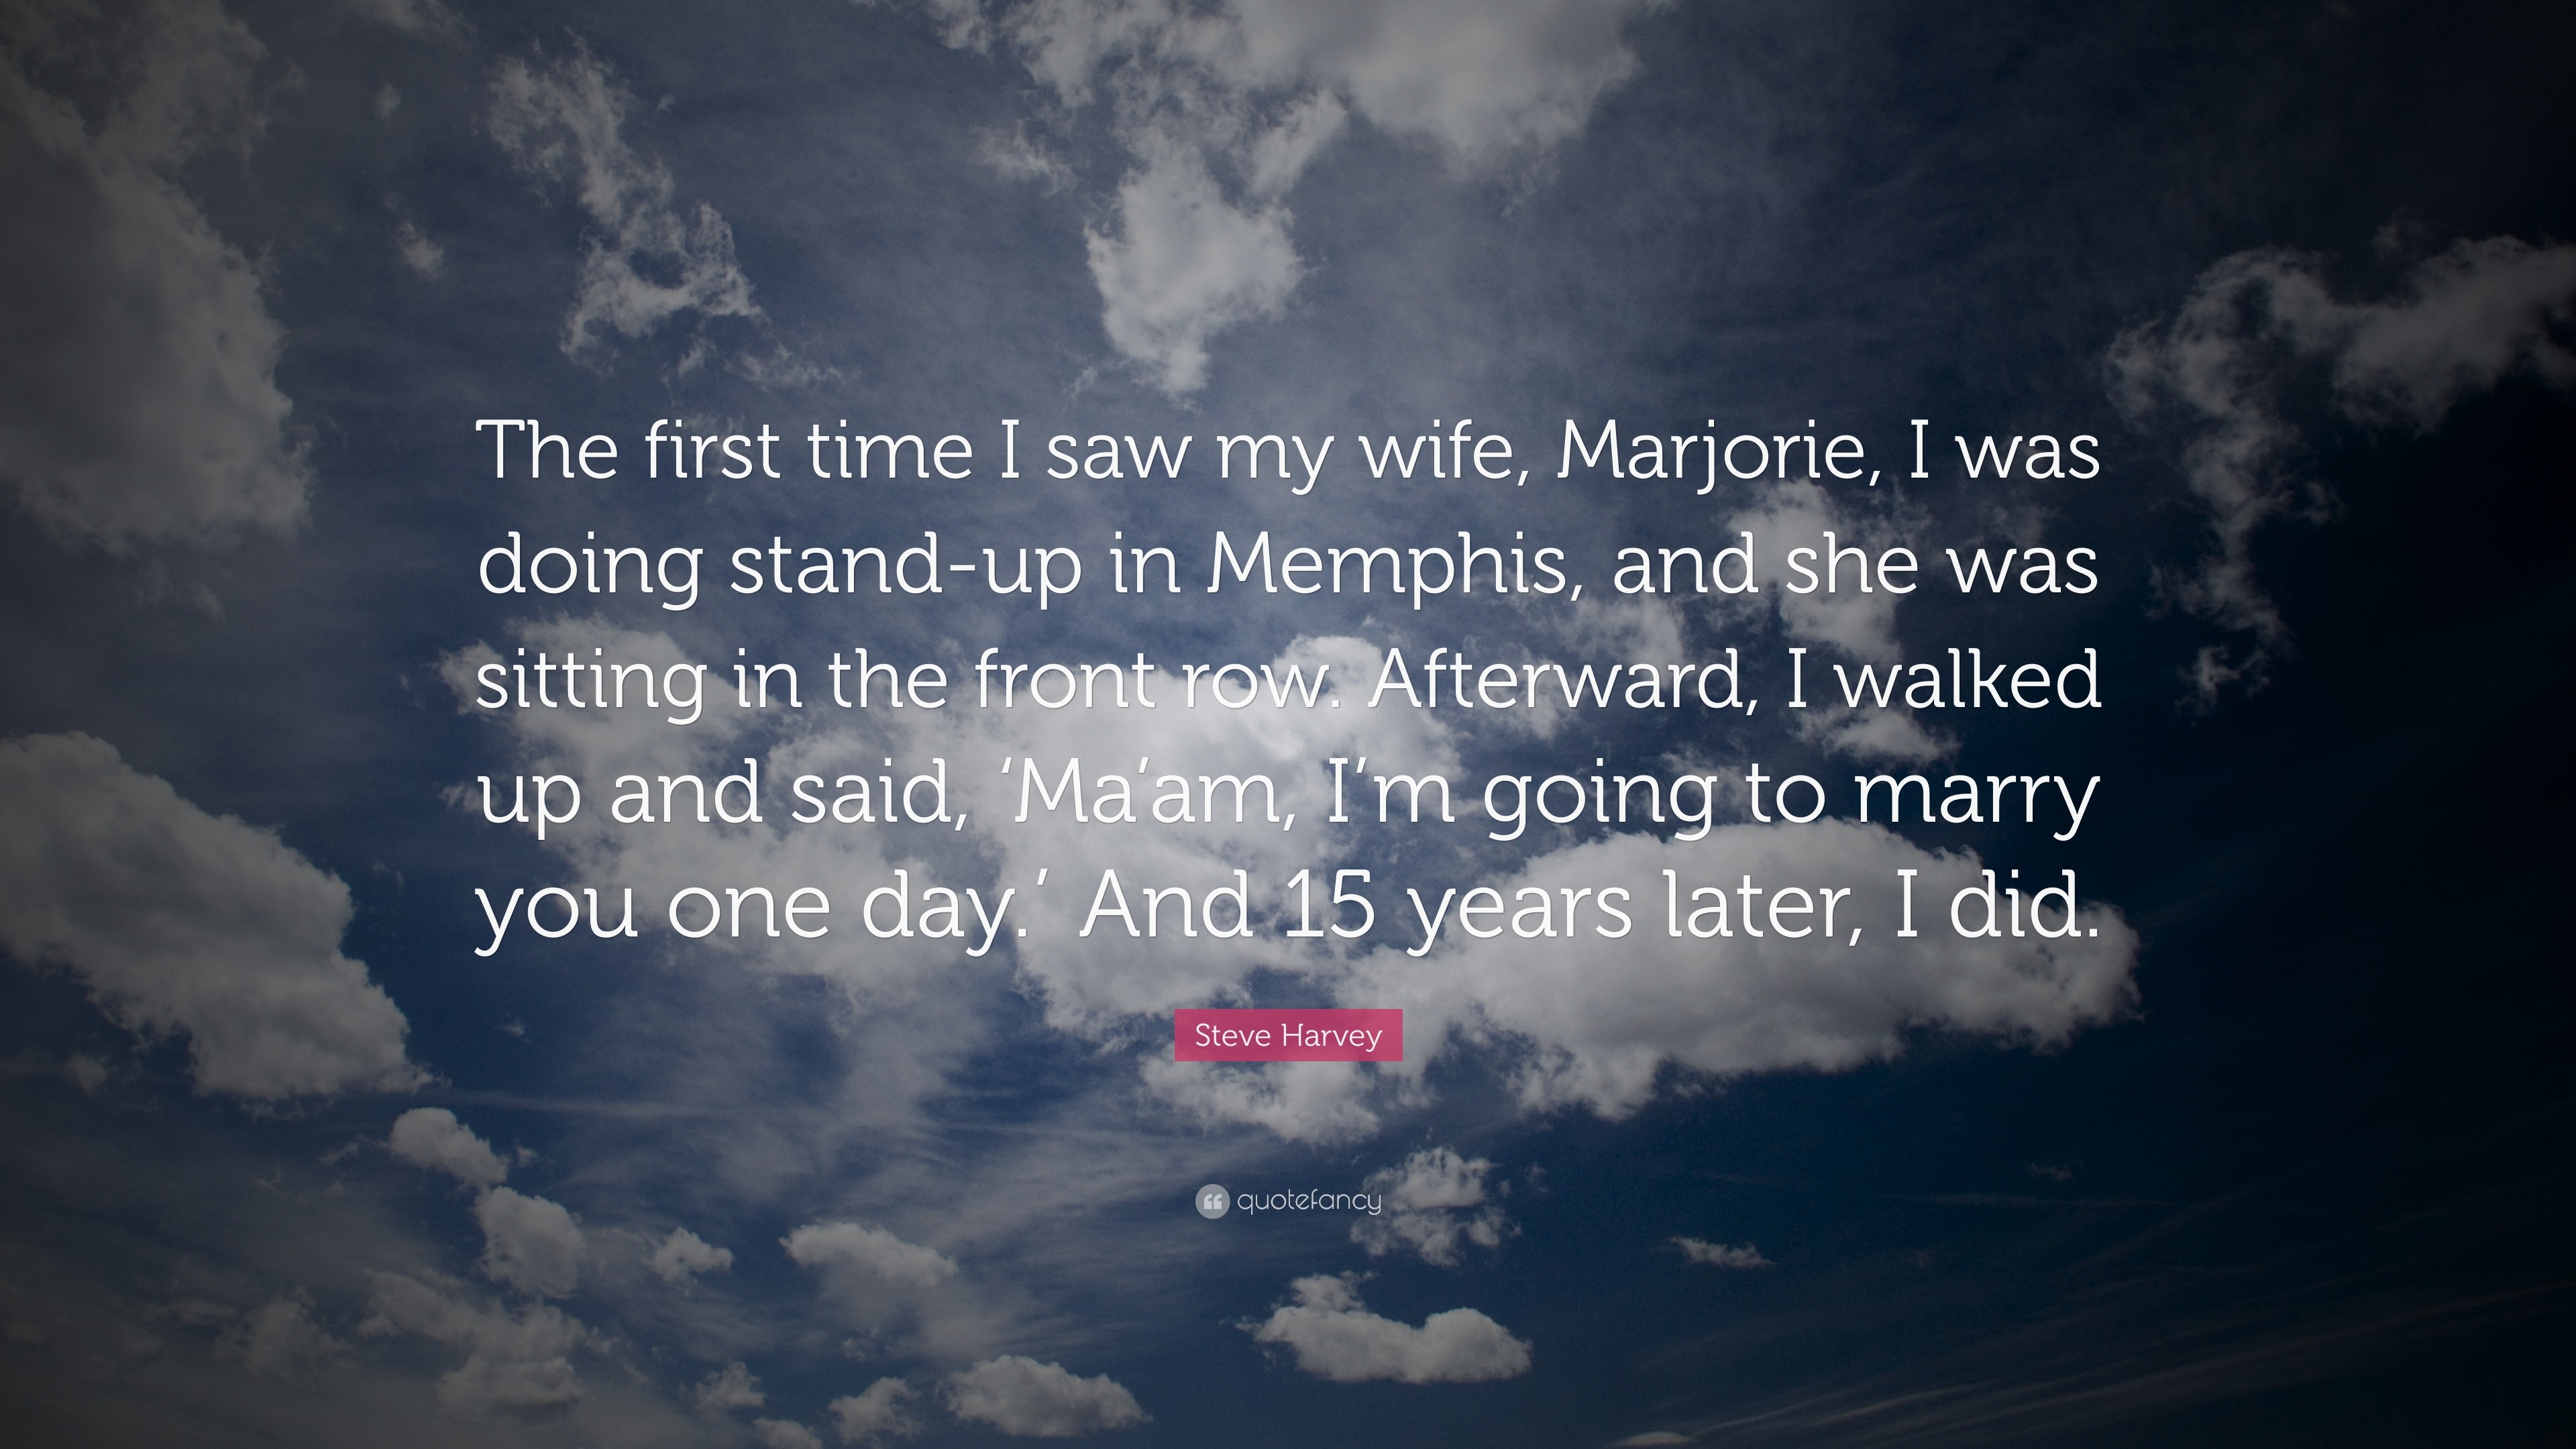 3840x2160 Steve Harvey Quote: “The first time I saw my wife, Marjorie, I